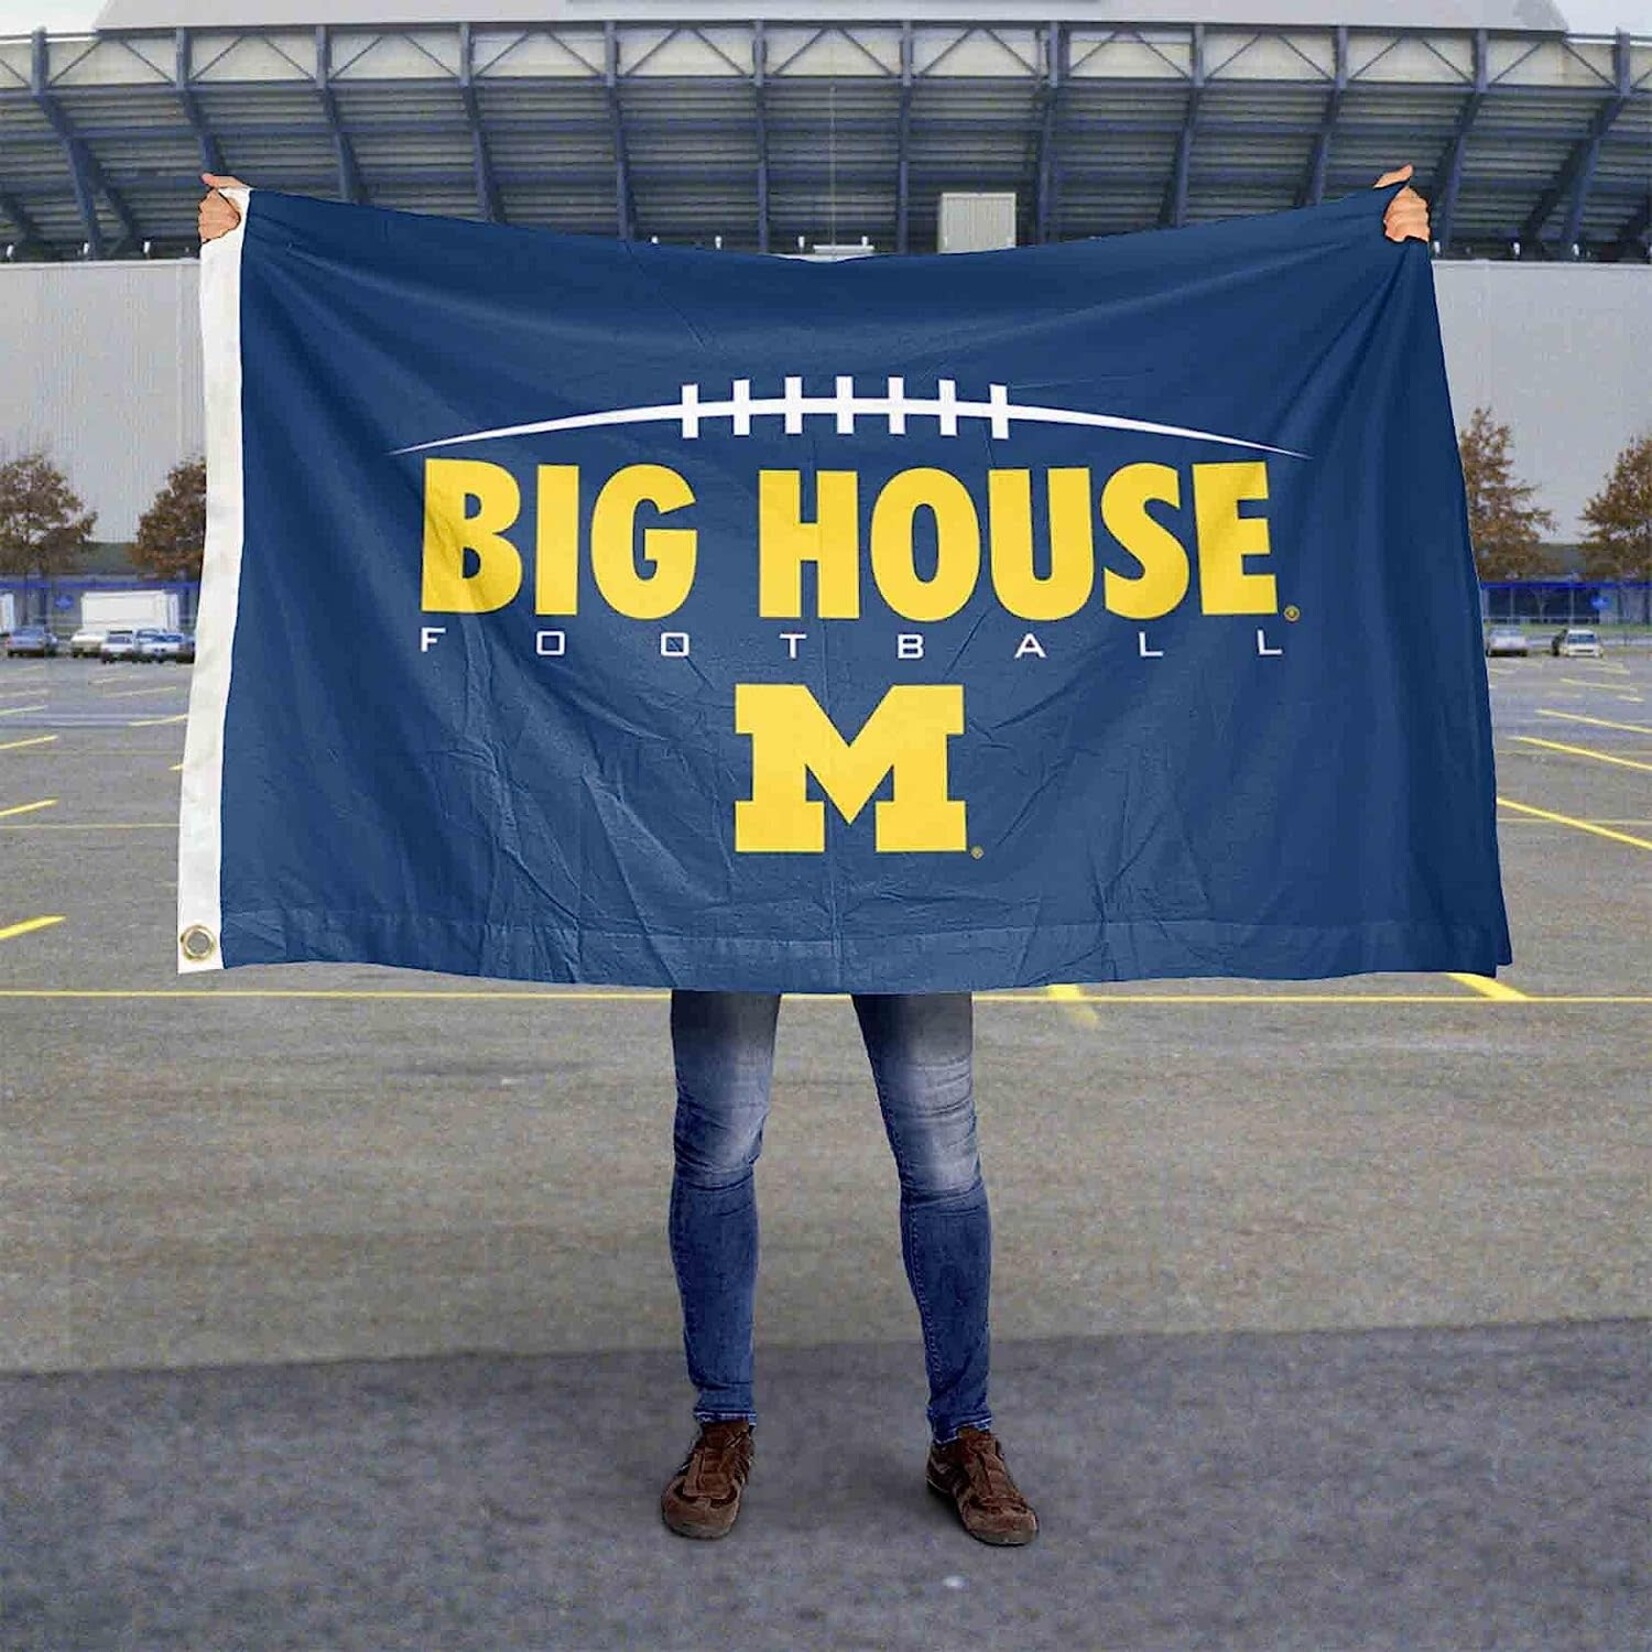 Sewing Concepts NCAA University of Michigan Big House Large College Flag 3' x 5'